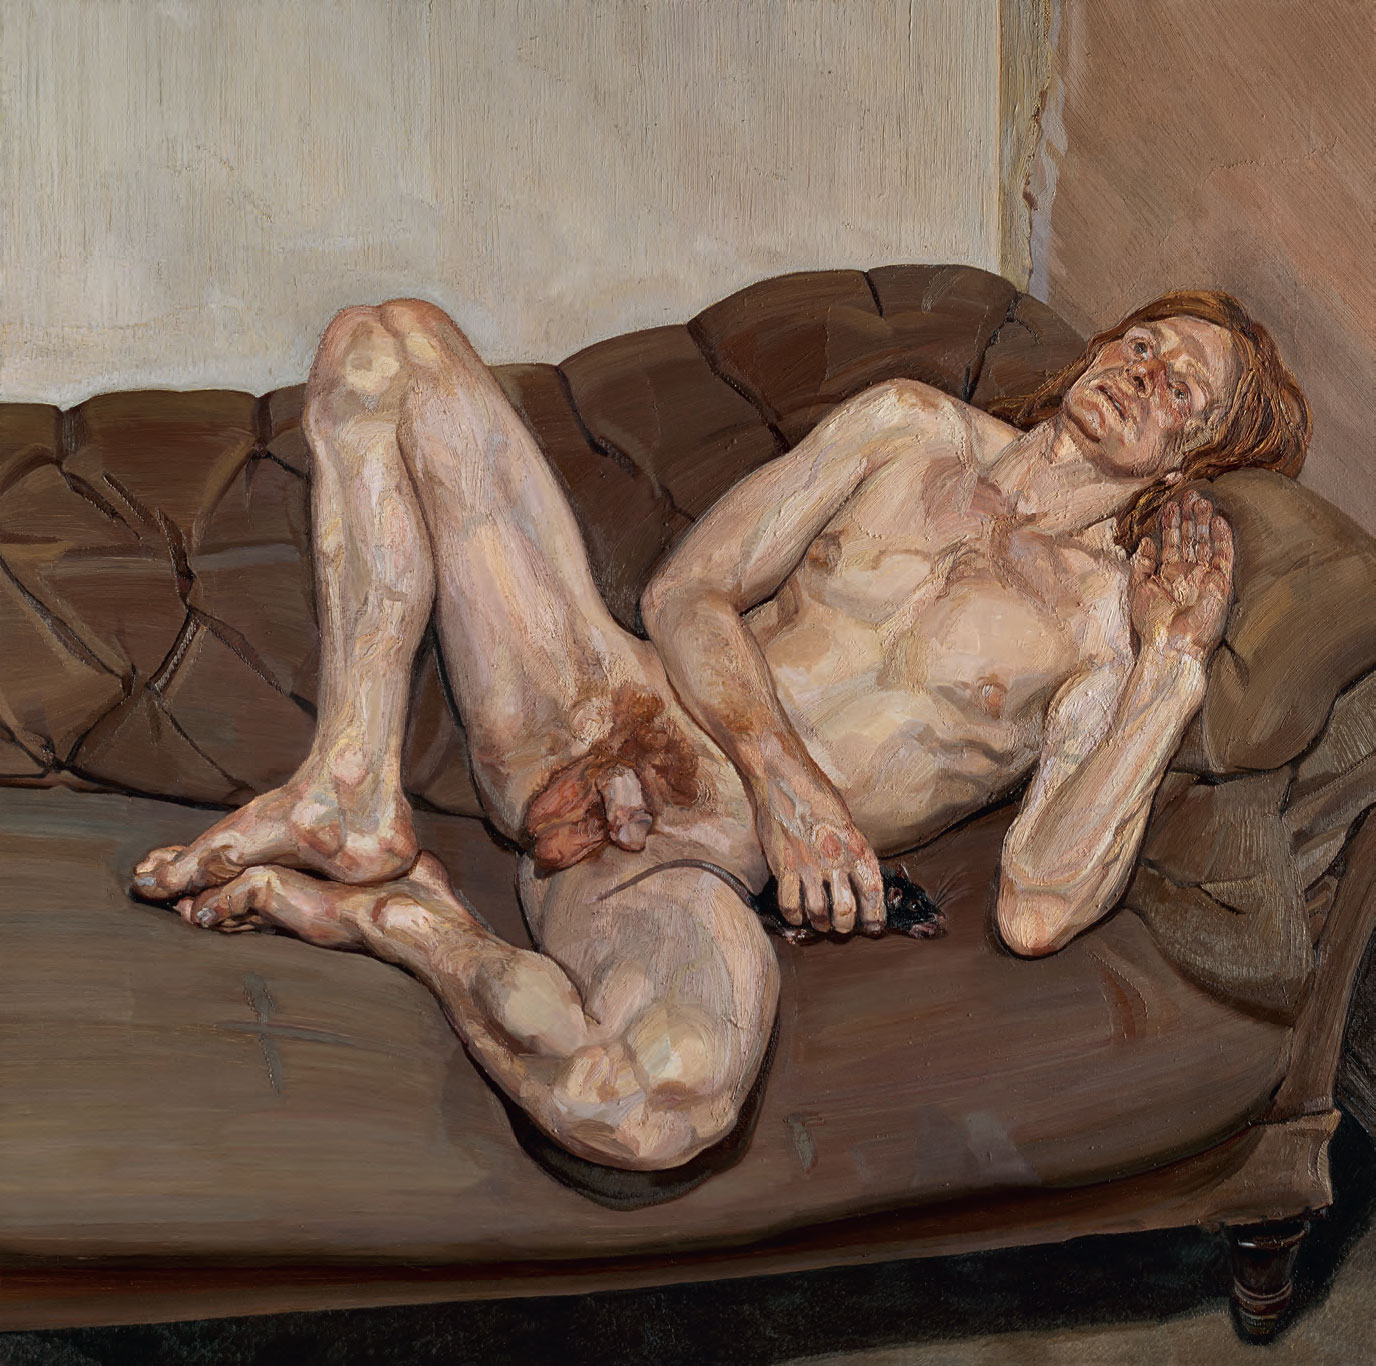 Naked Man with a Rat (1977–8) by Lucian Freud